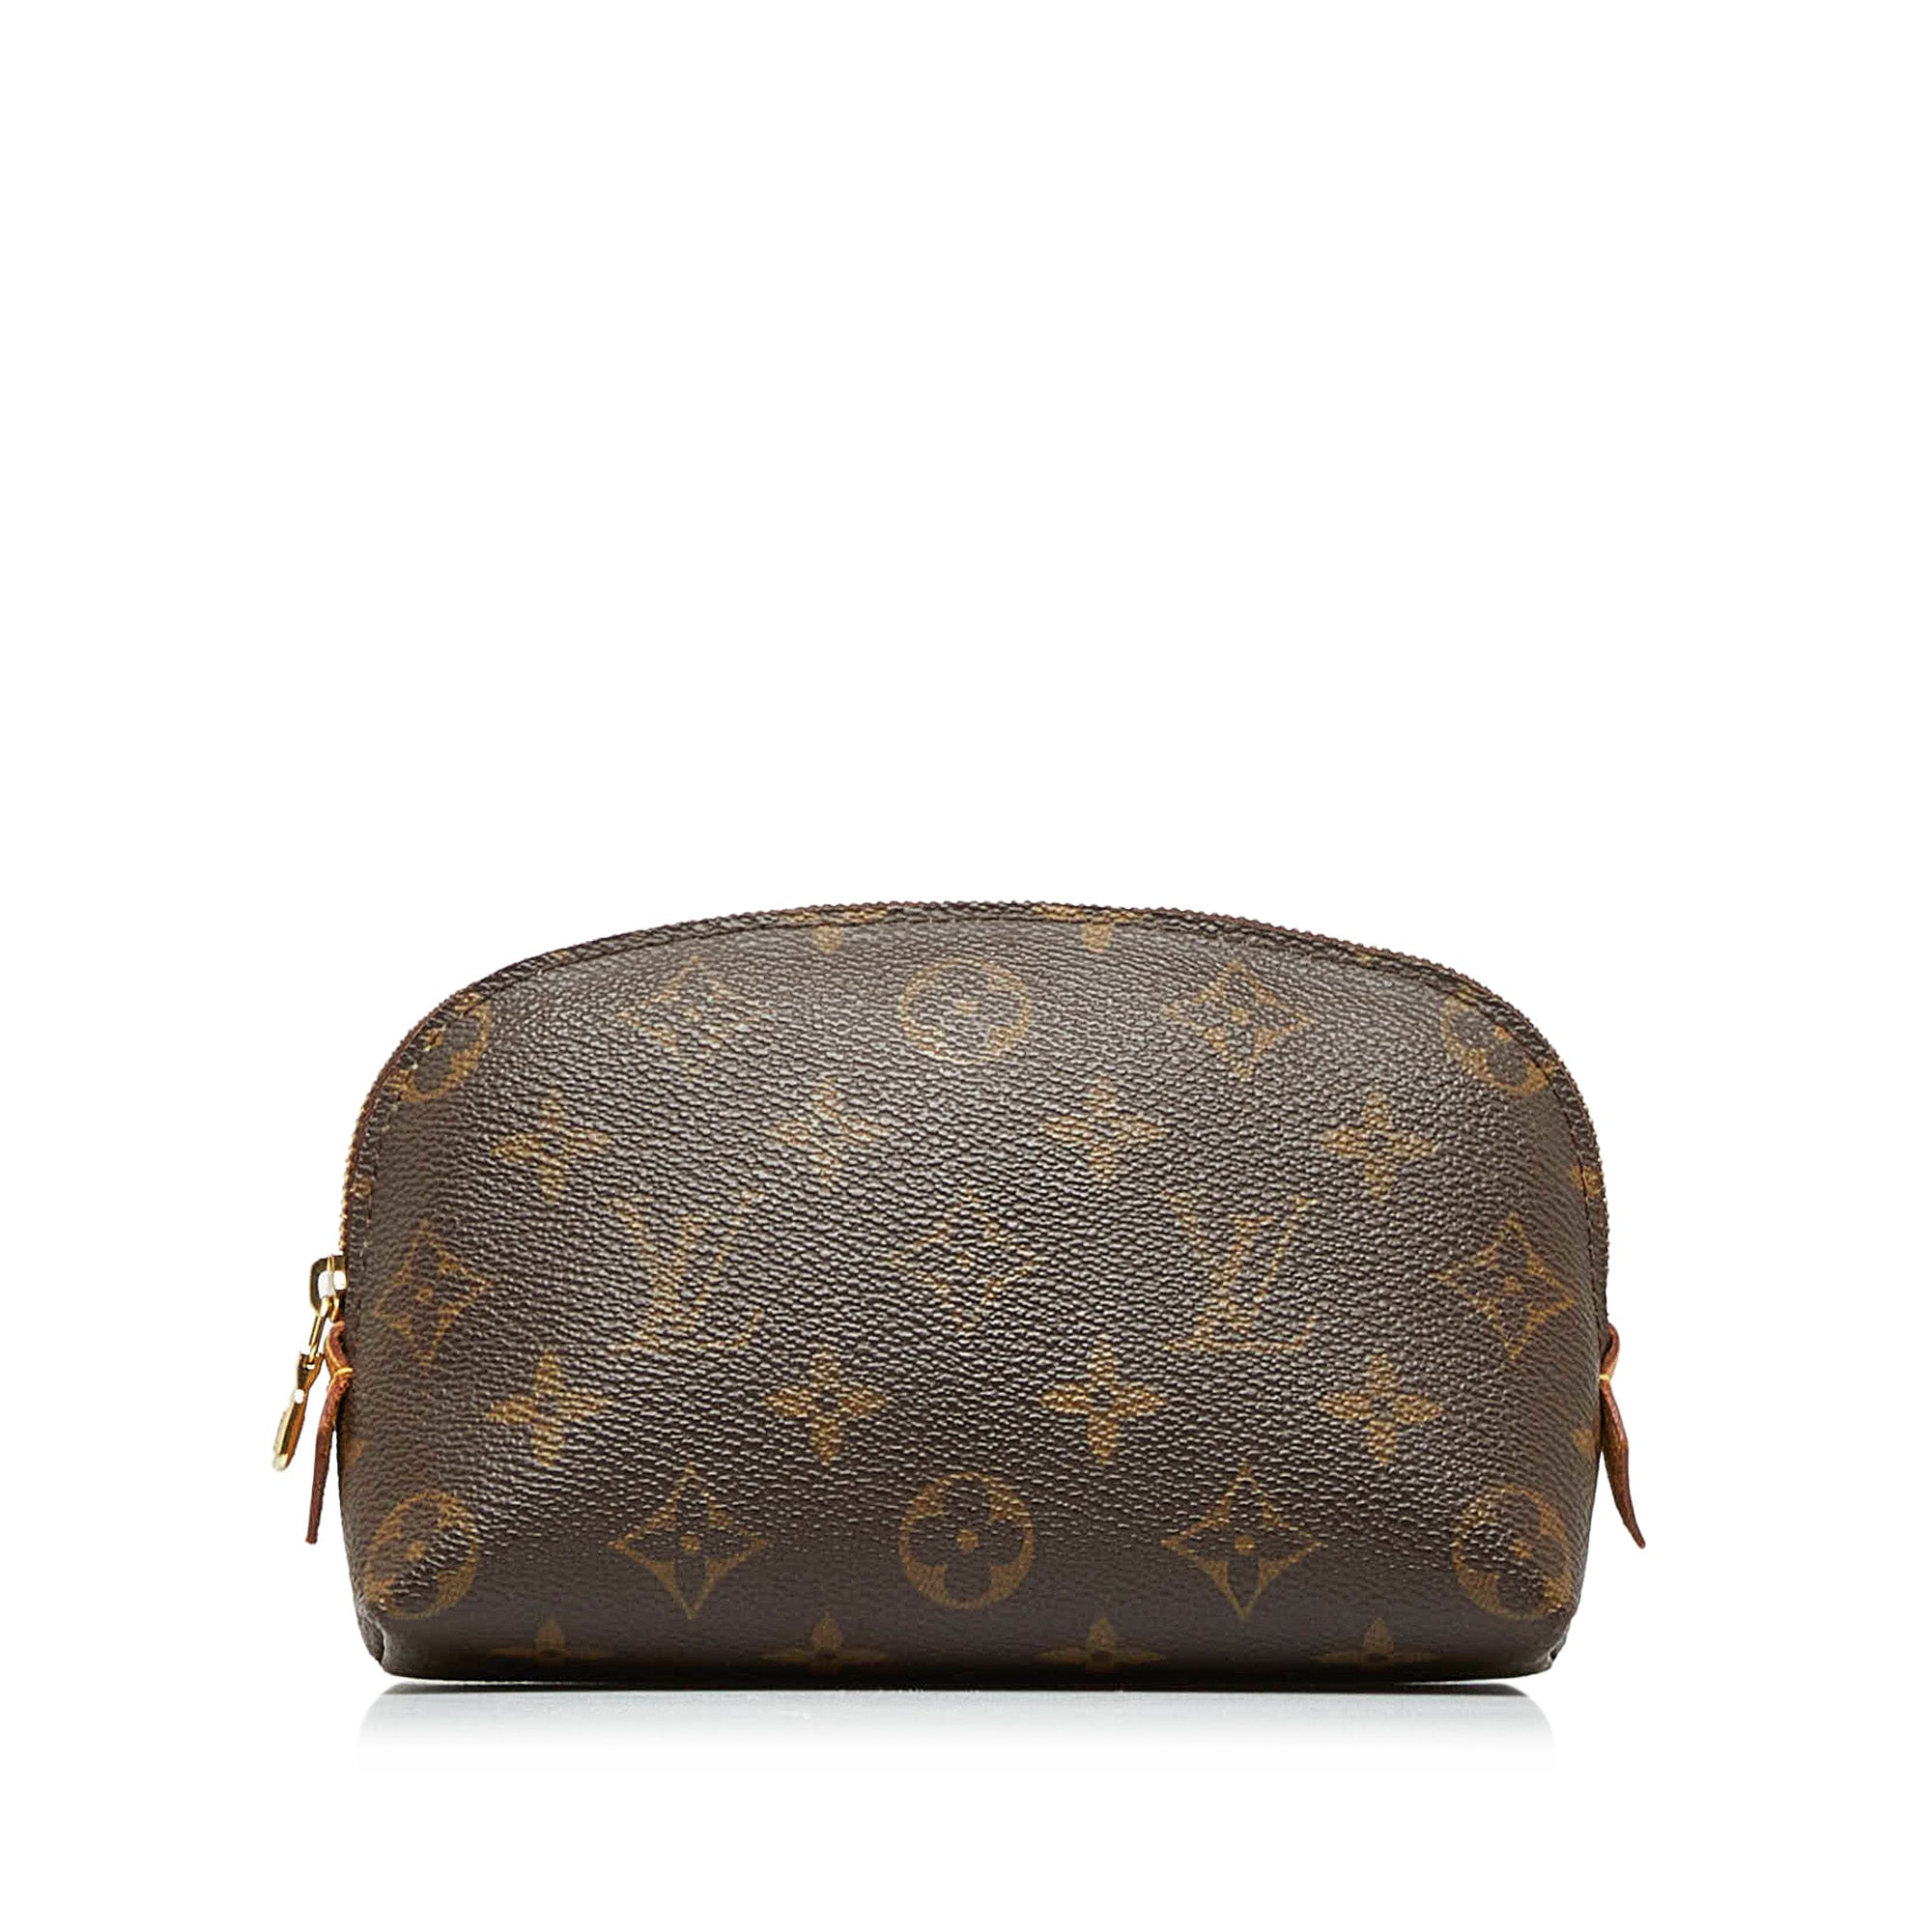 Buy Pre-Owned LOUIS VUITTON Cosmetic Pouch PM Monogram